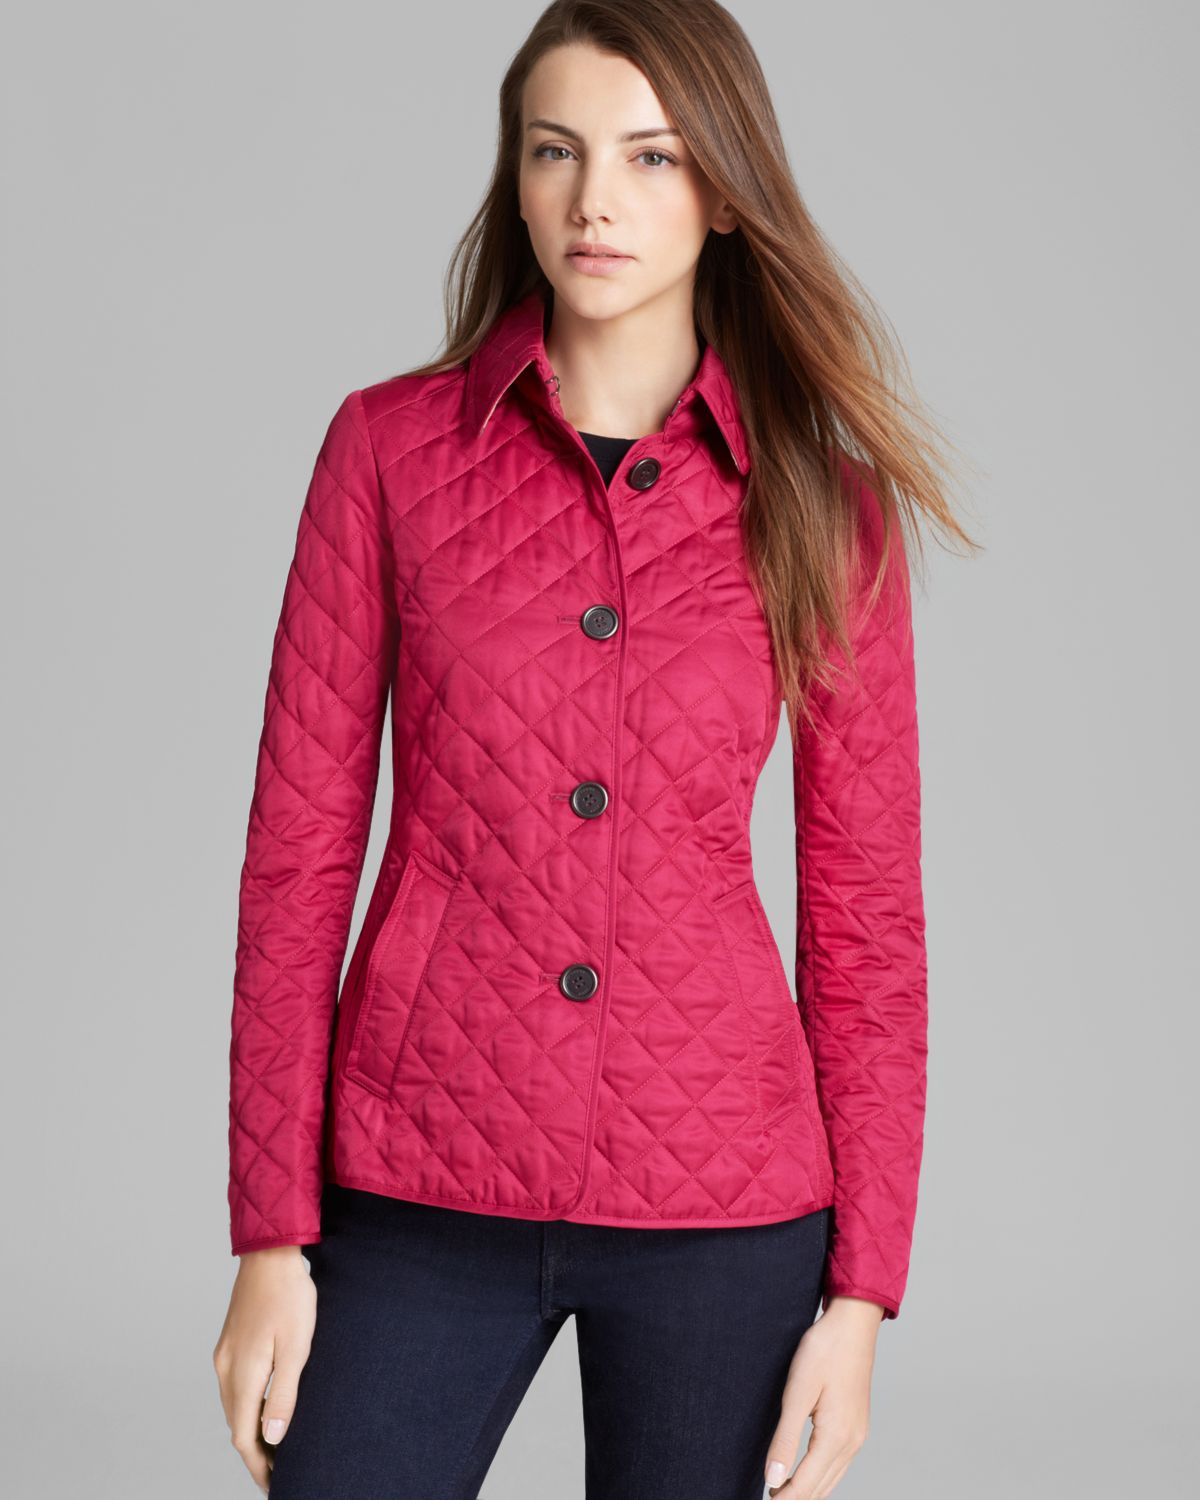 Burberry Brit Copford Quilted Jacket in Bright Magenta (Purple) - Lyst